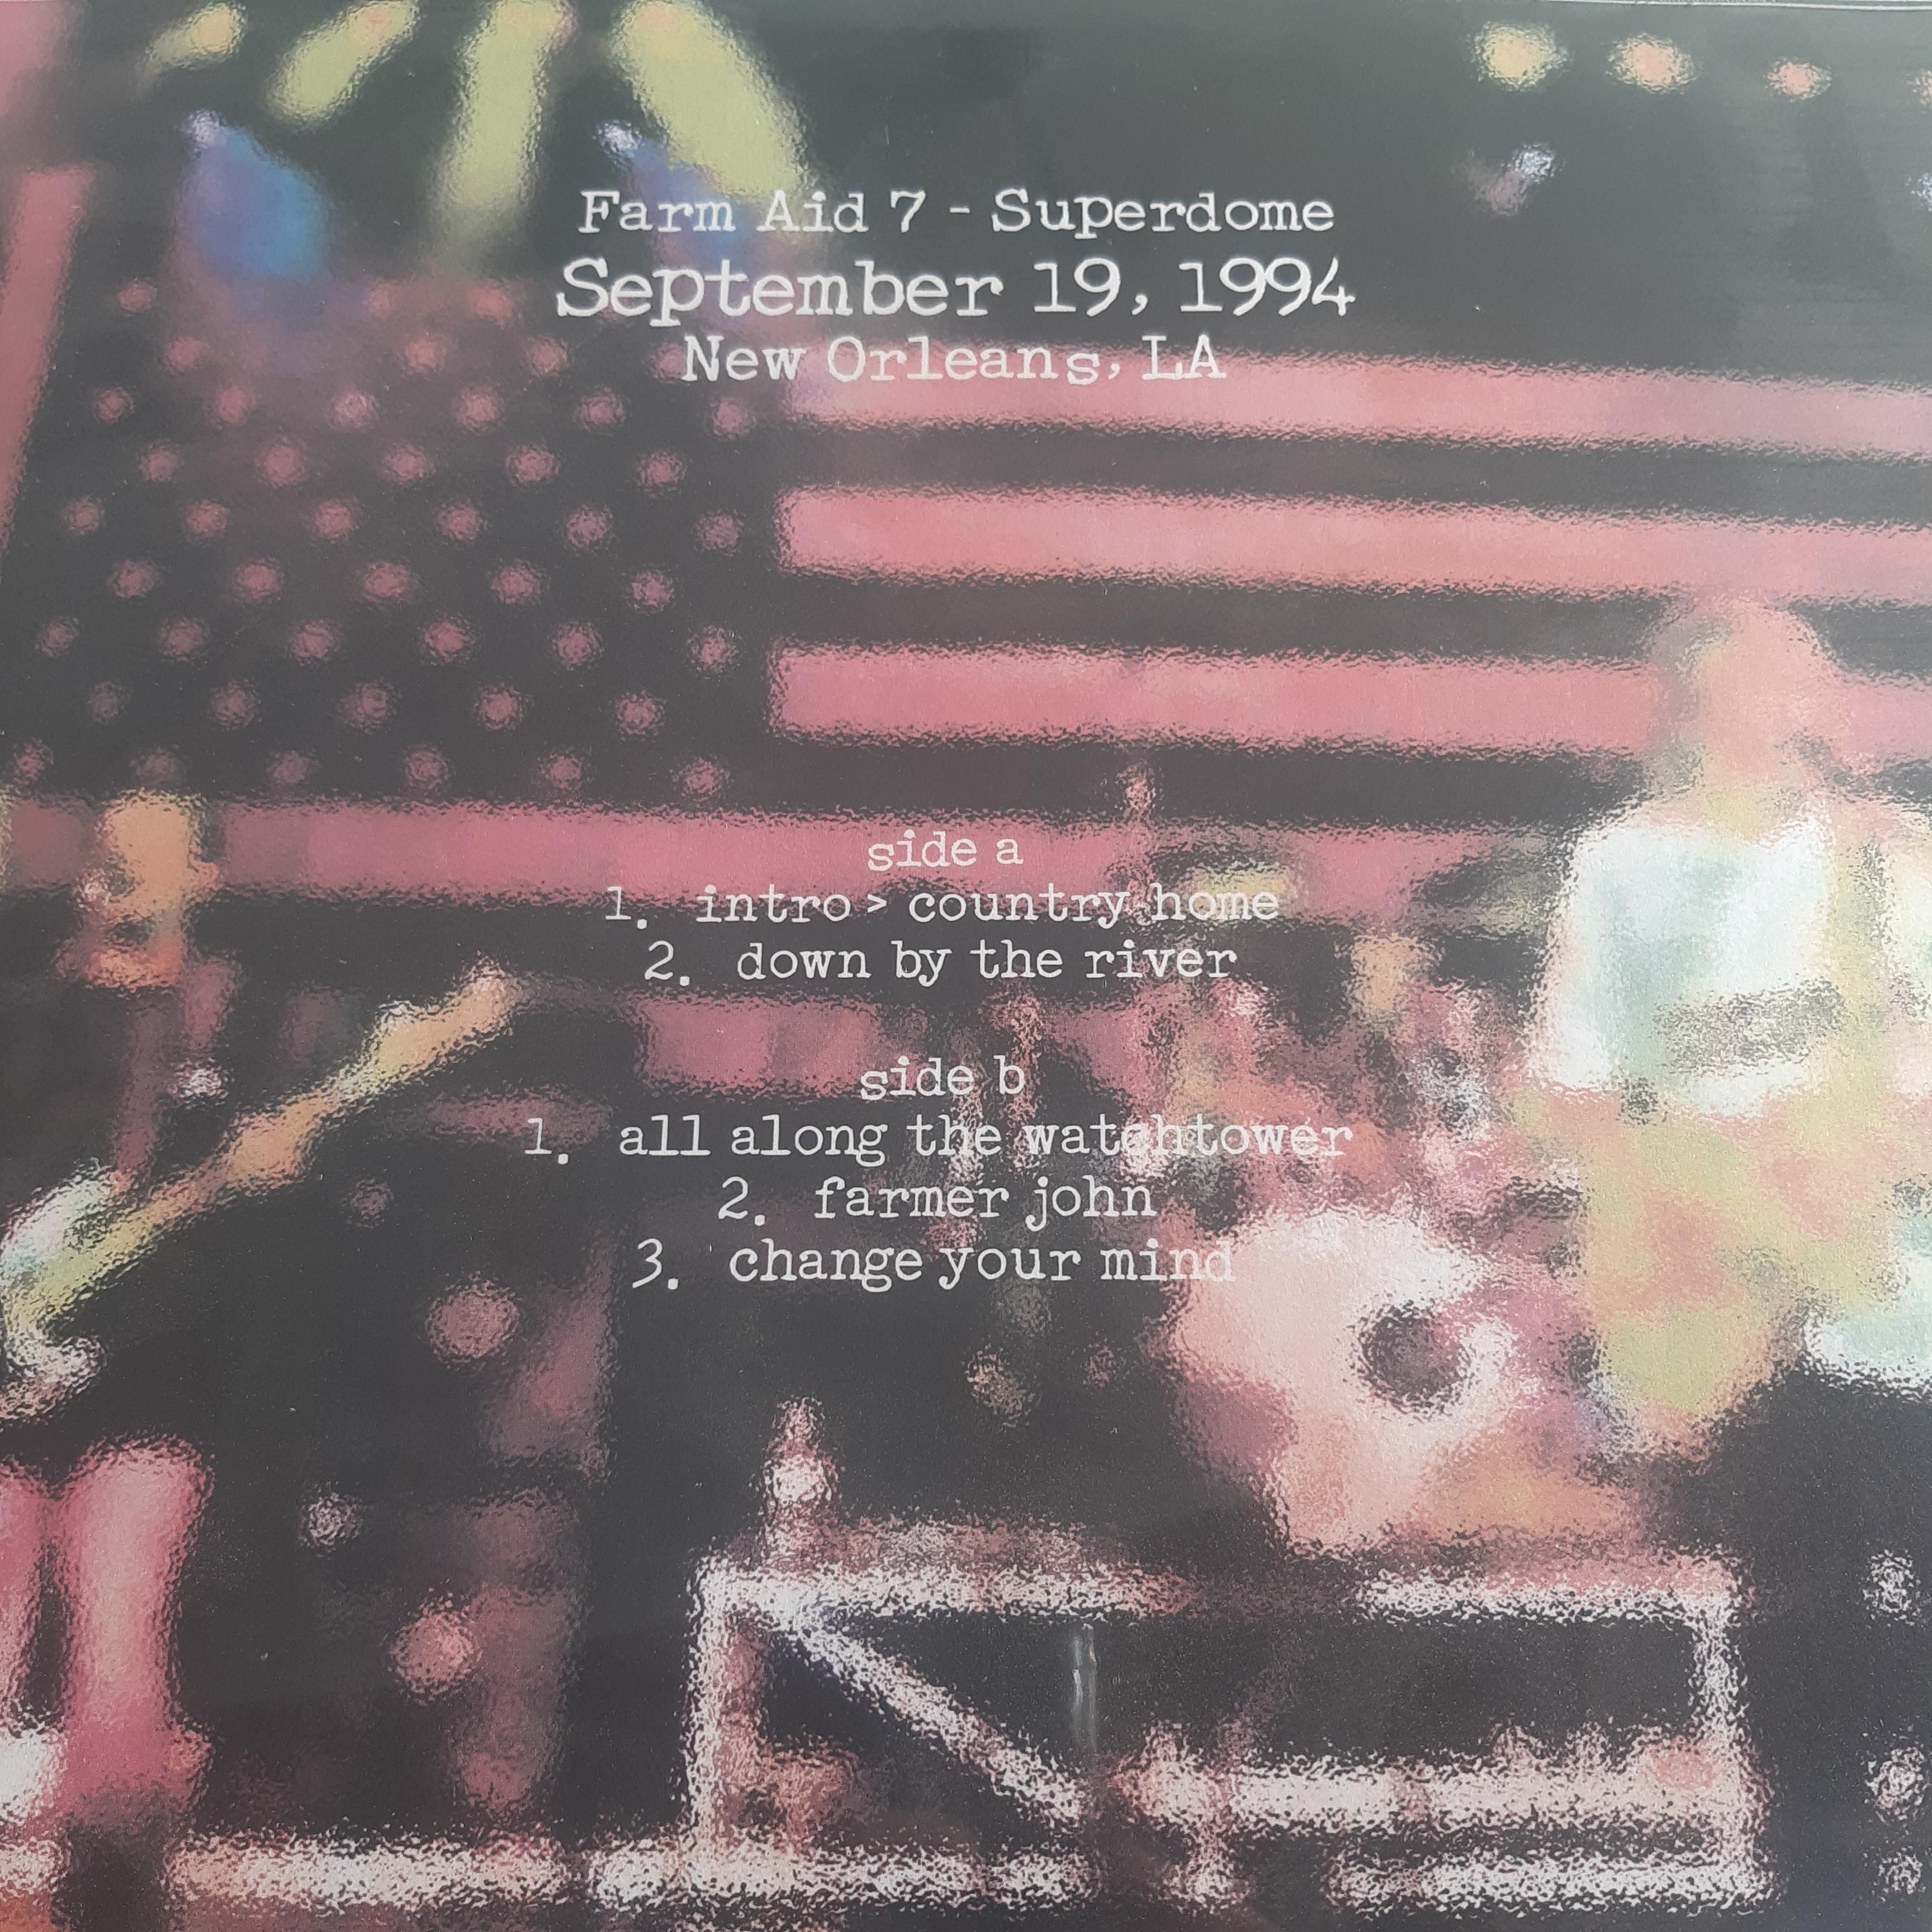 Neil Young & Crazy Horse - Live At Farm Aid 7 In New Orleans 1994 - LP (uusi)